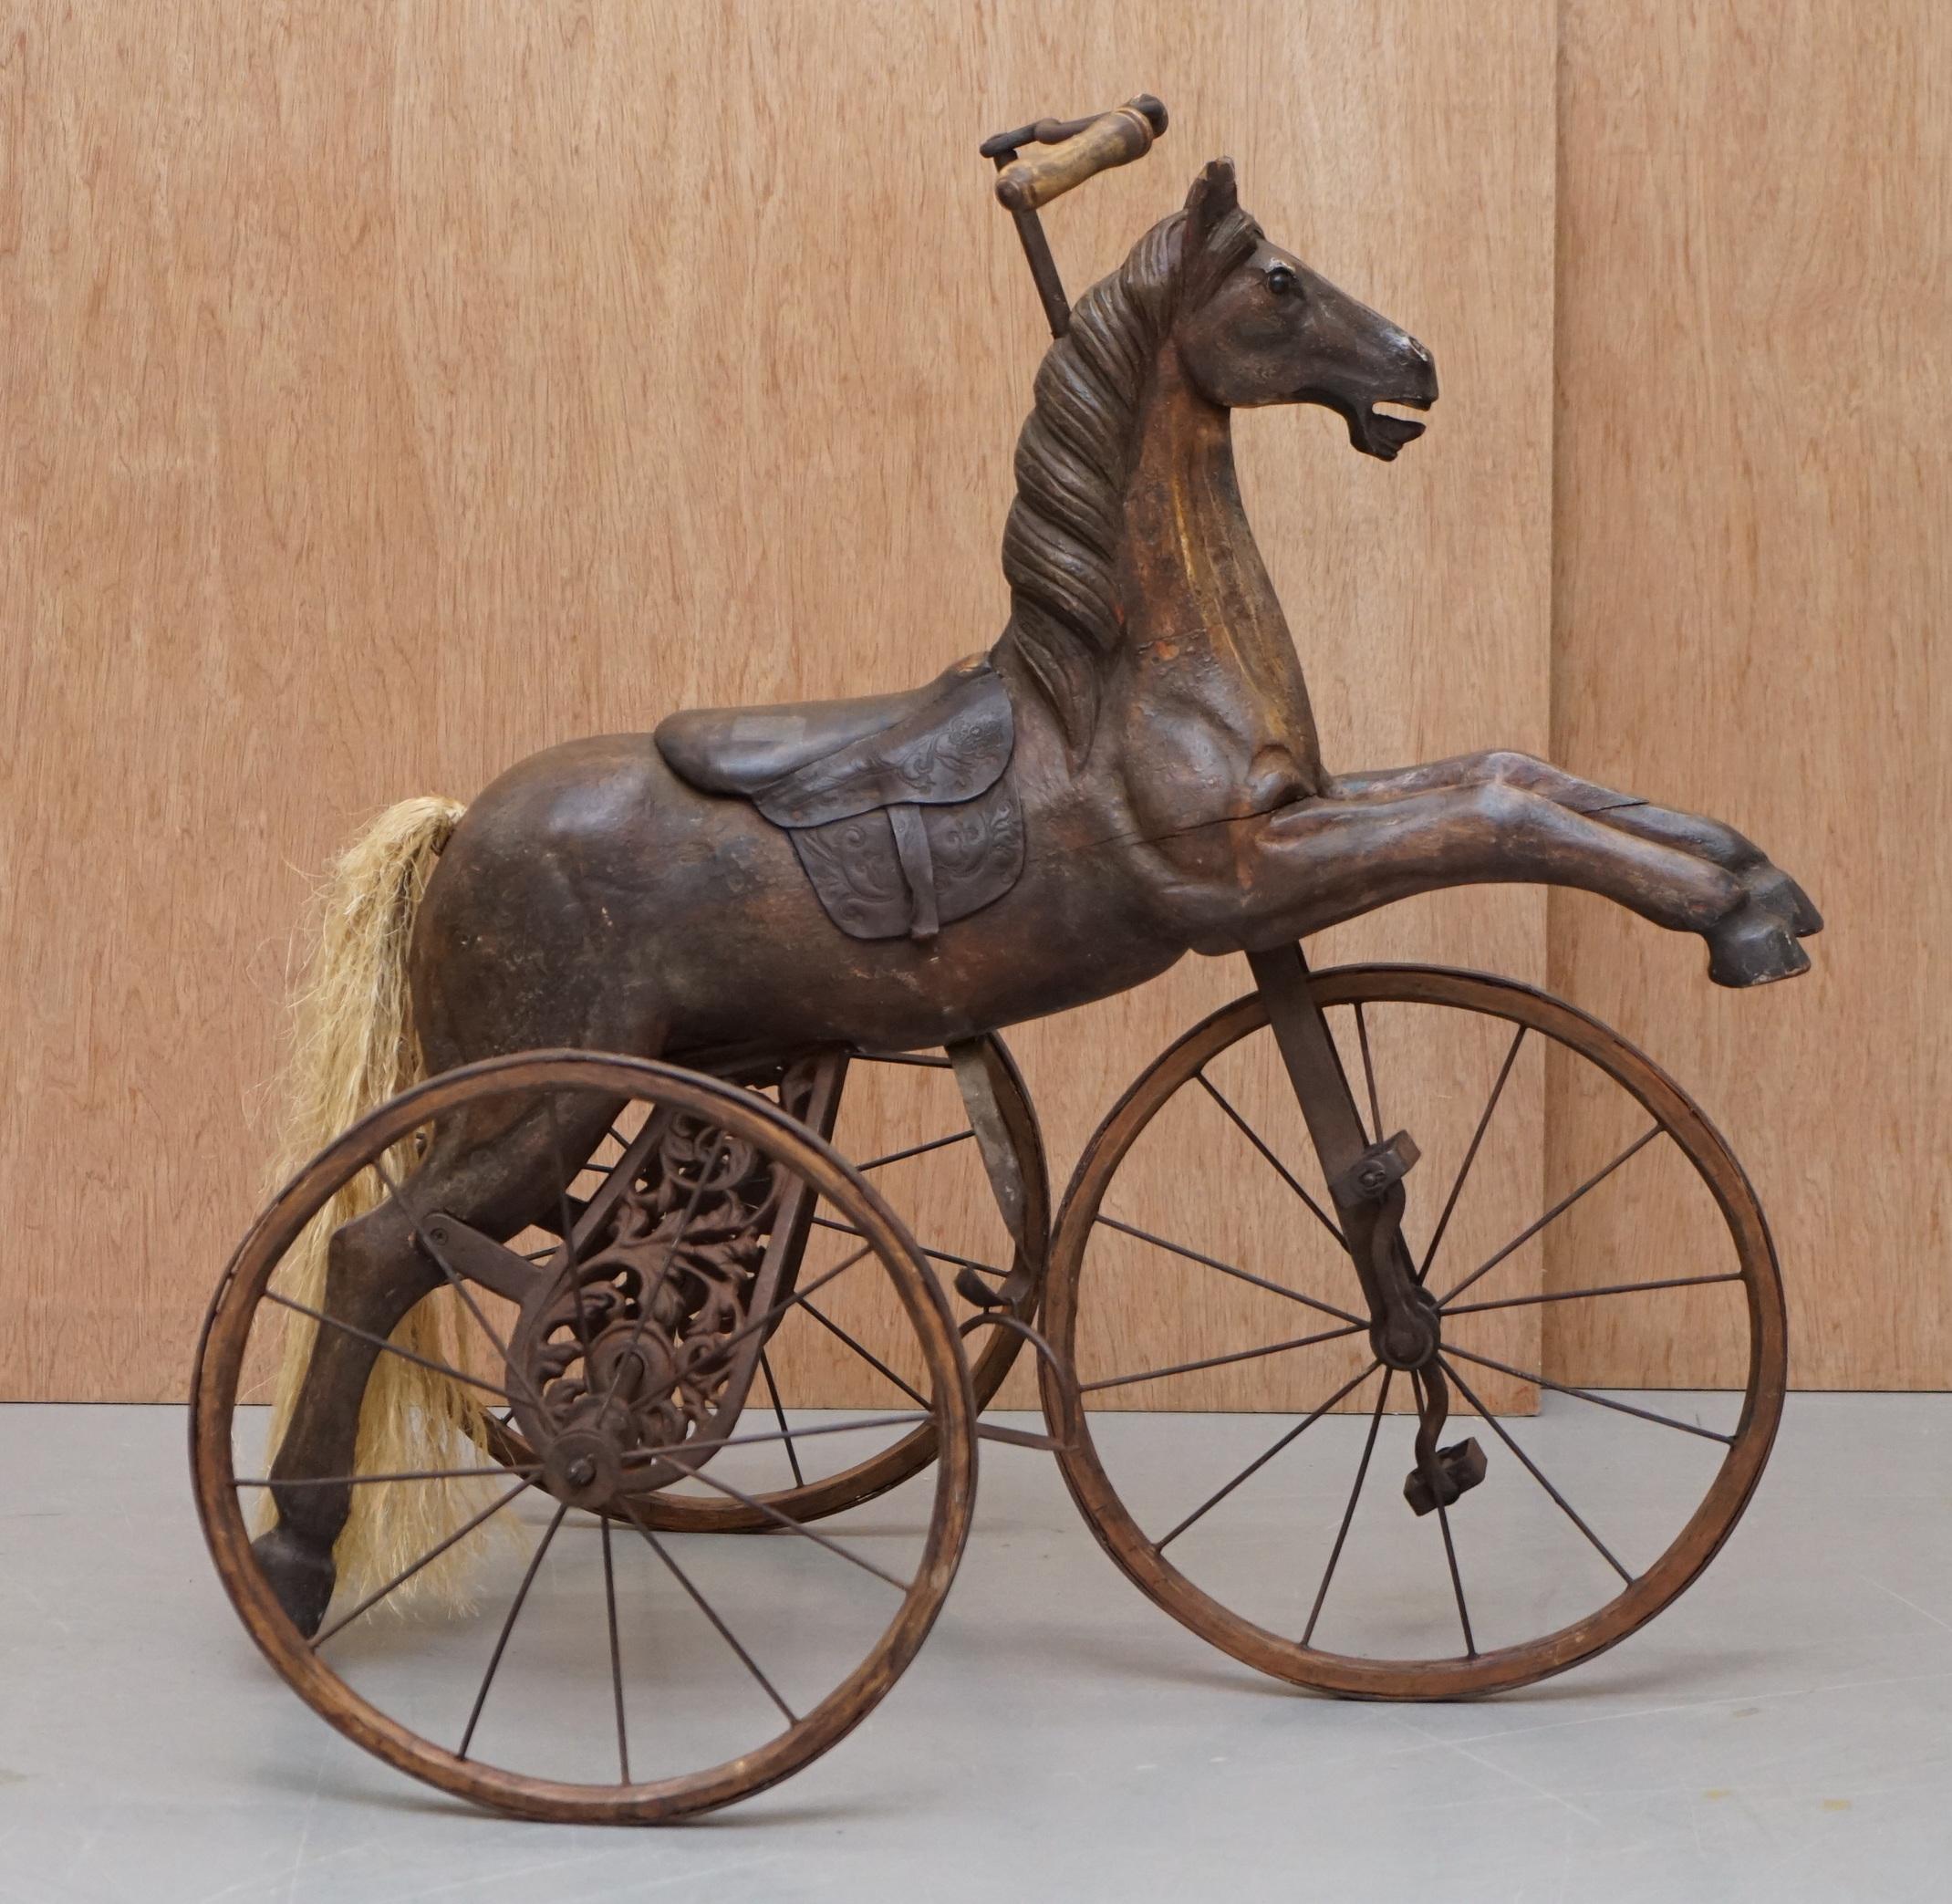 English Stunning Original Paint and Leather Saddle Victorian Horse Tricycle Decorative